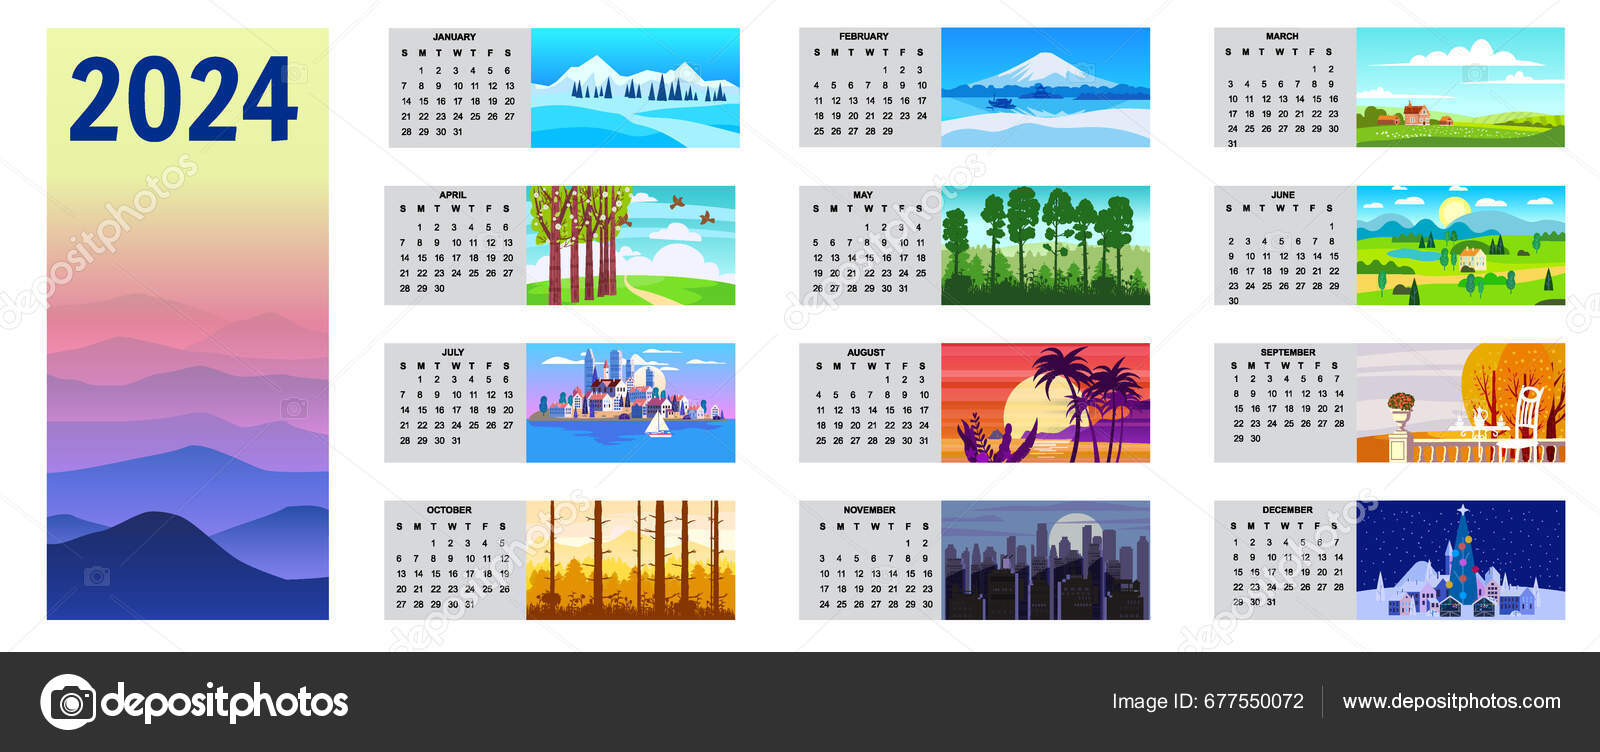 Calendrier 2020 annuel paysage style postes